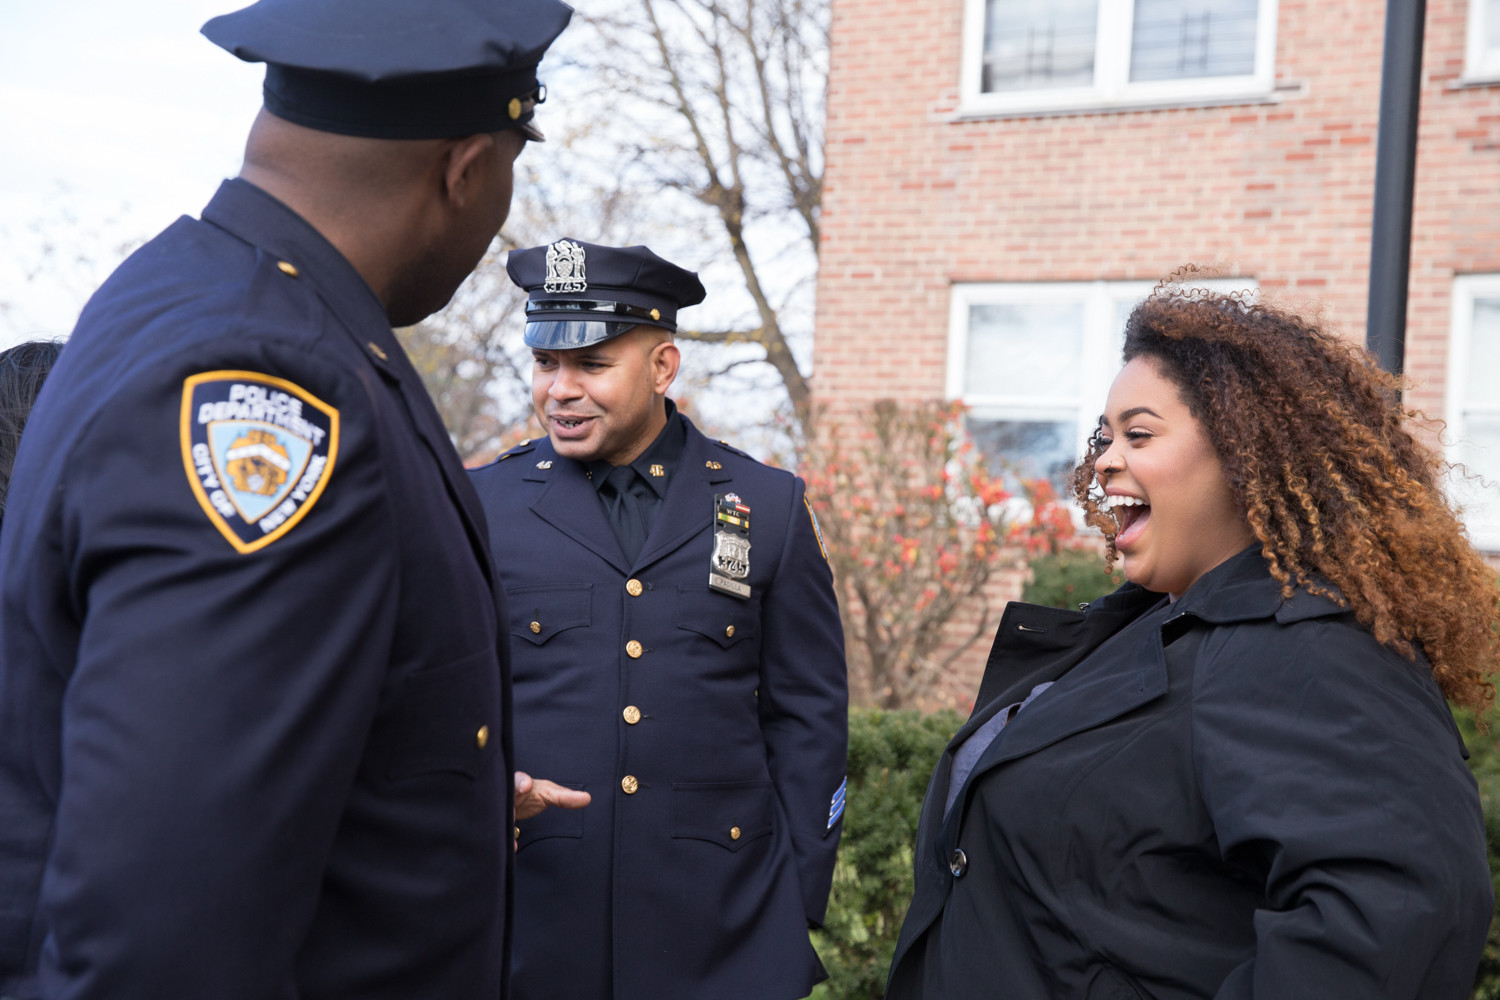 Genesis Villella, the eldest daughter of slain police officer Miosotis Familia, laughs with members of the New York Police Department after a news conference announcing her family’s new home at Skyview-on-the-Hudson.